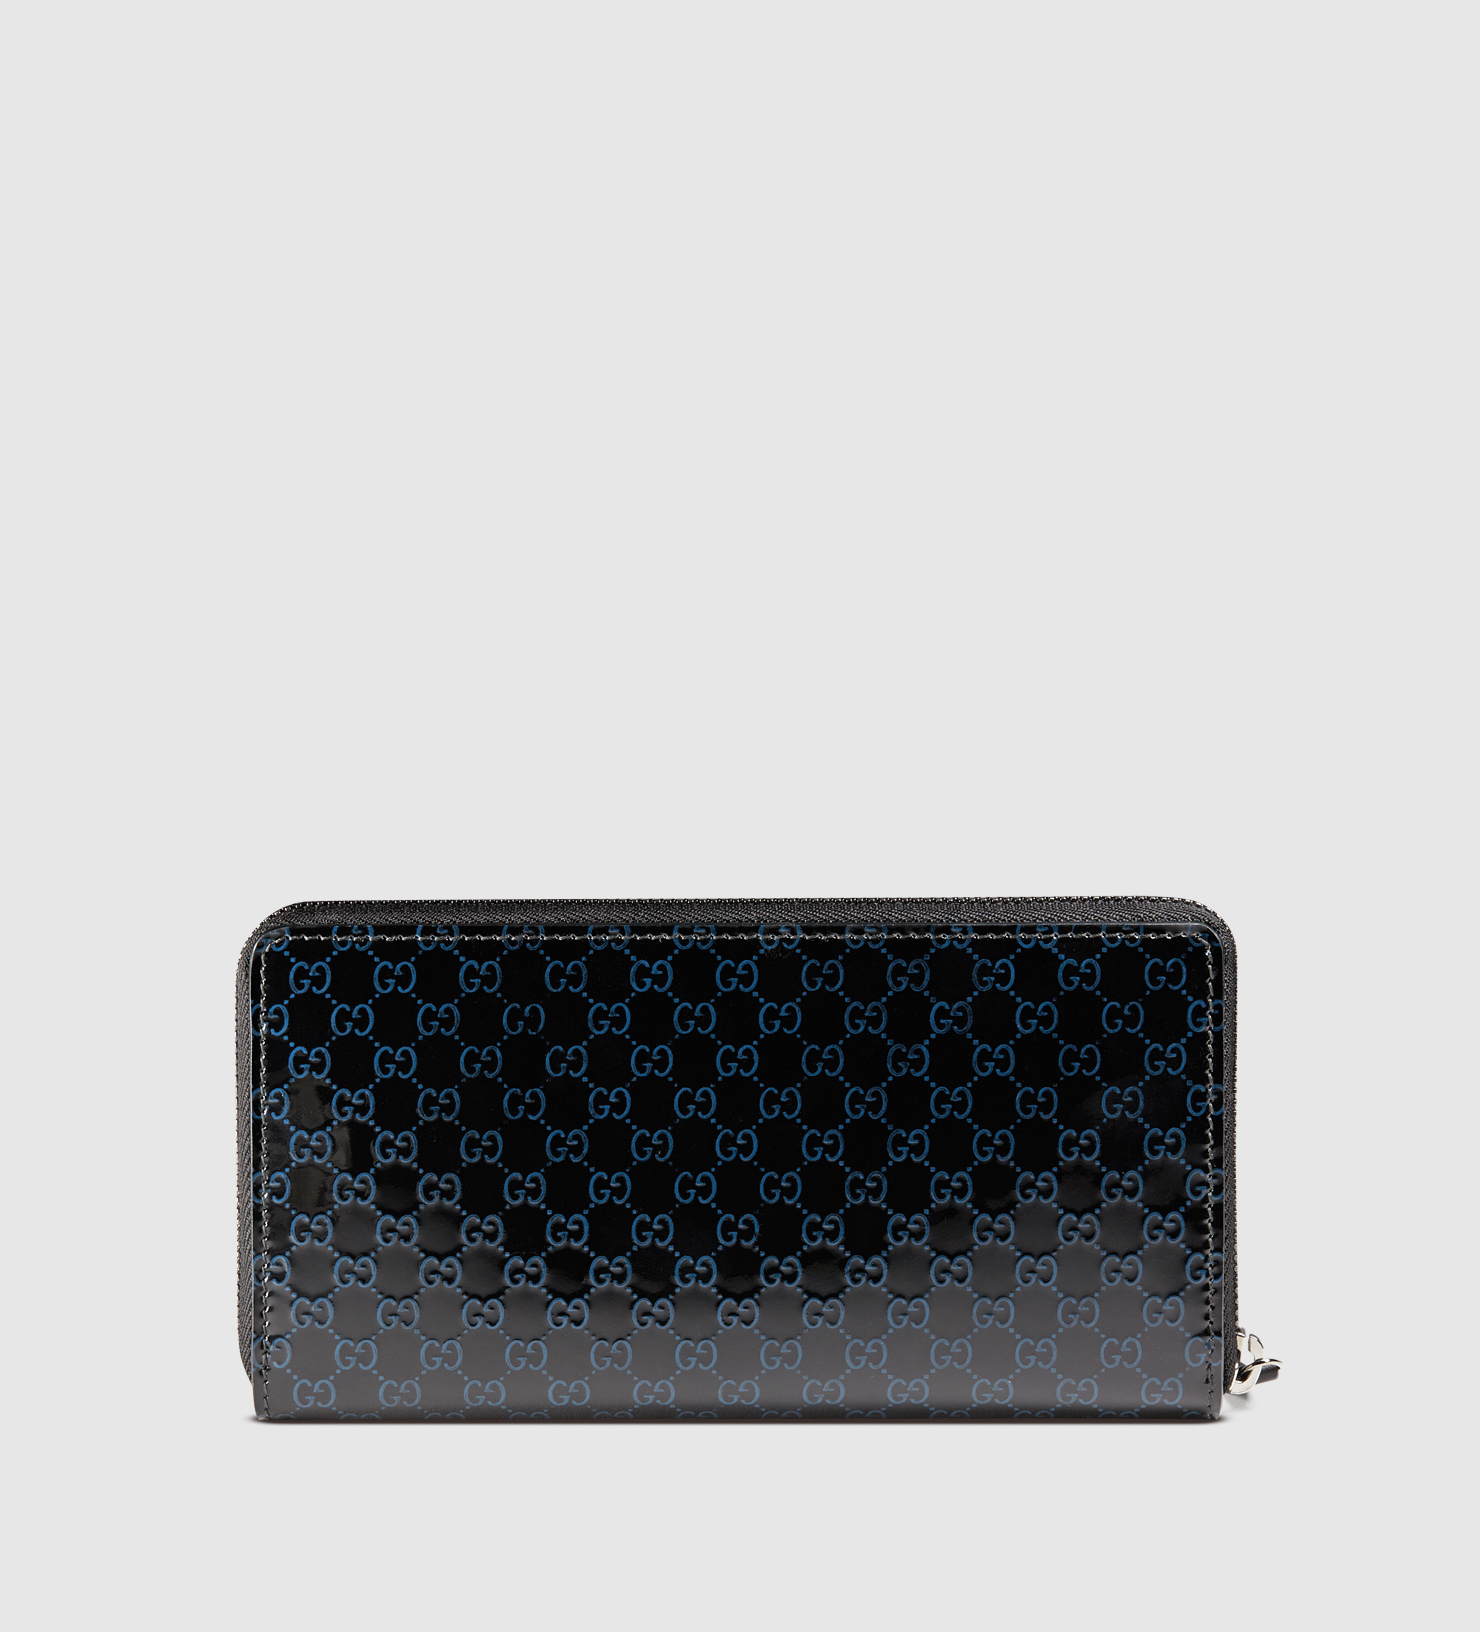 gucci patent leather wallet